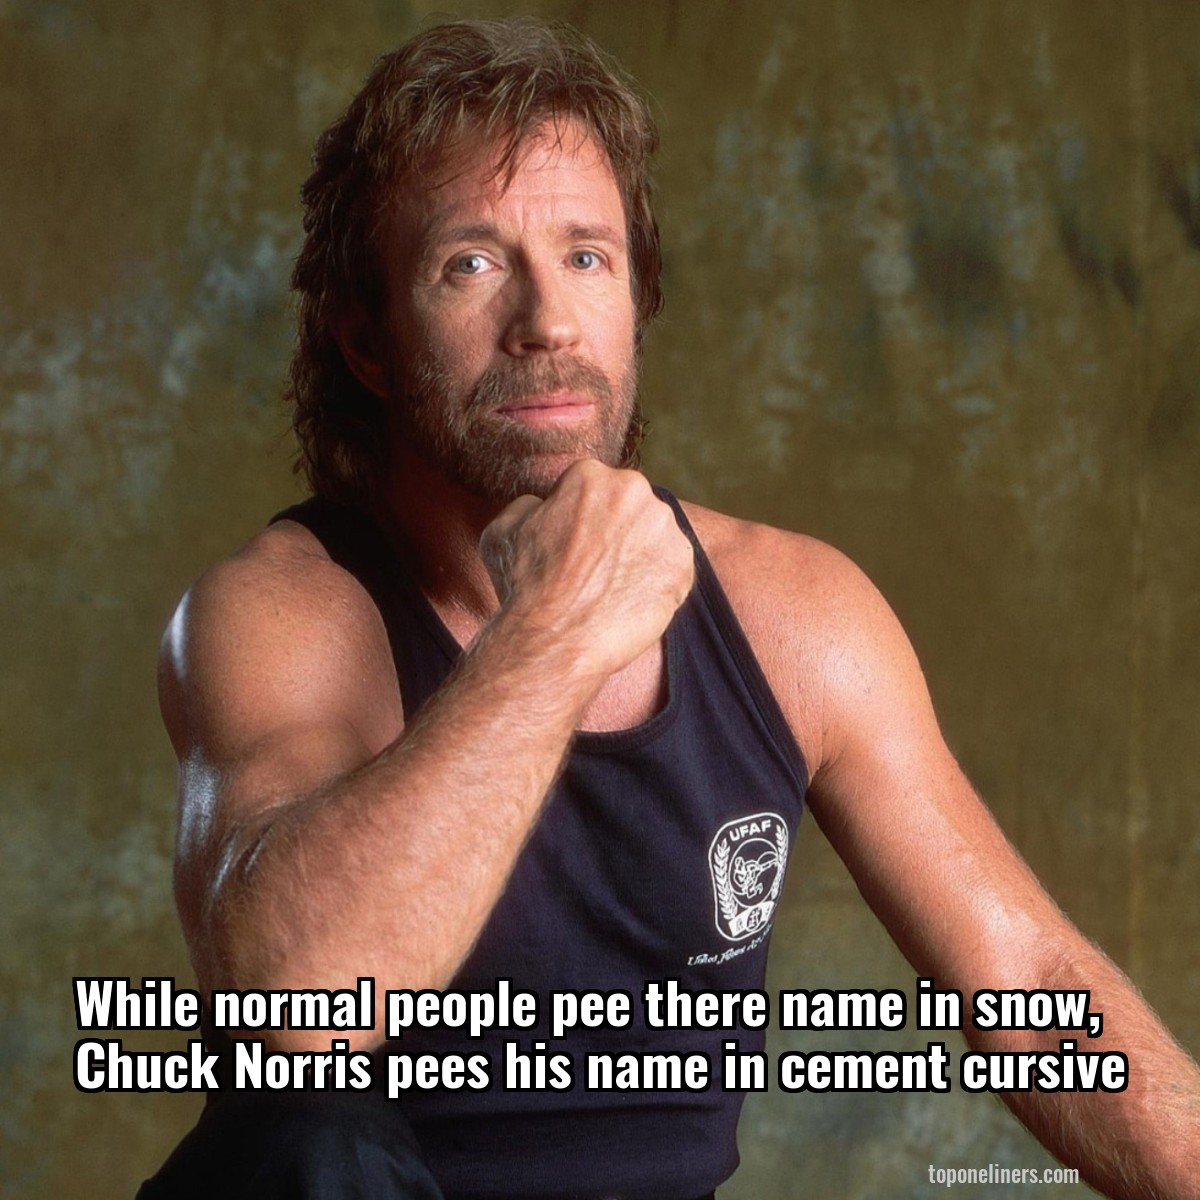 While normal people pee there name in snow, Chuck Norris pees his name in cement cursive